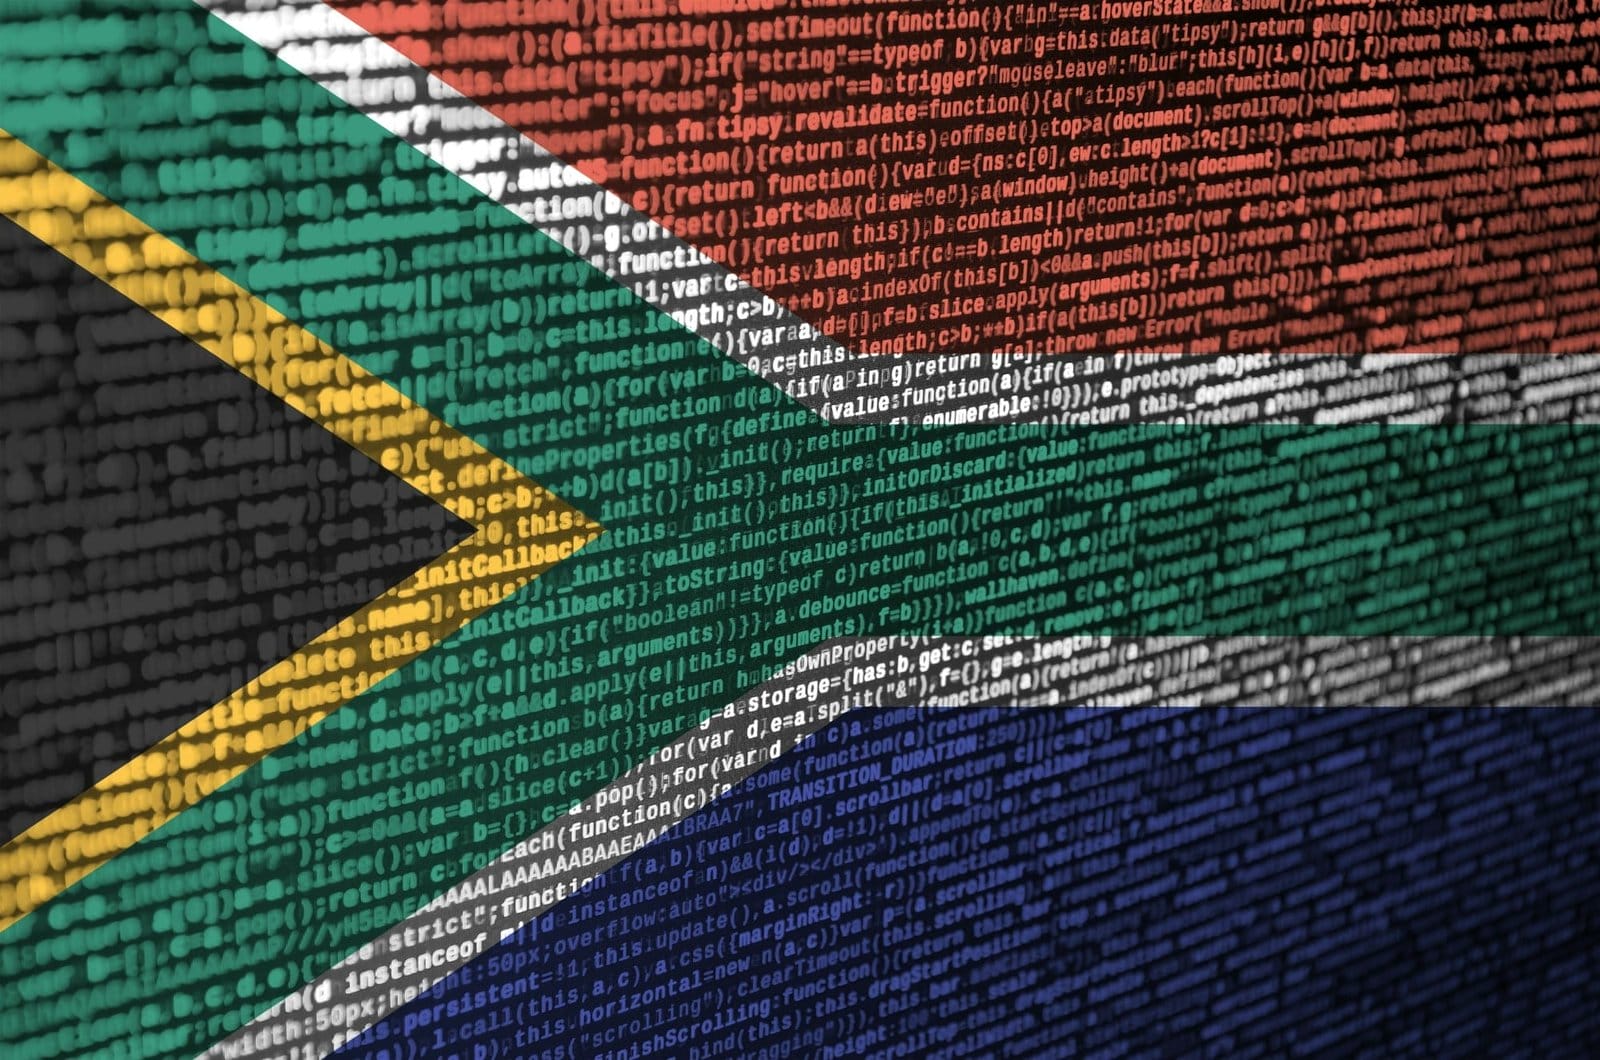 South Africa flag is depicted on the screen with the program code